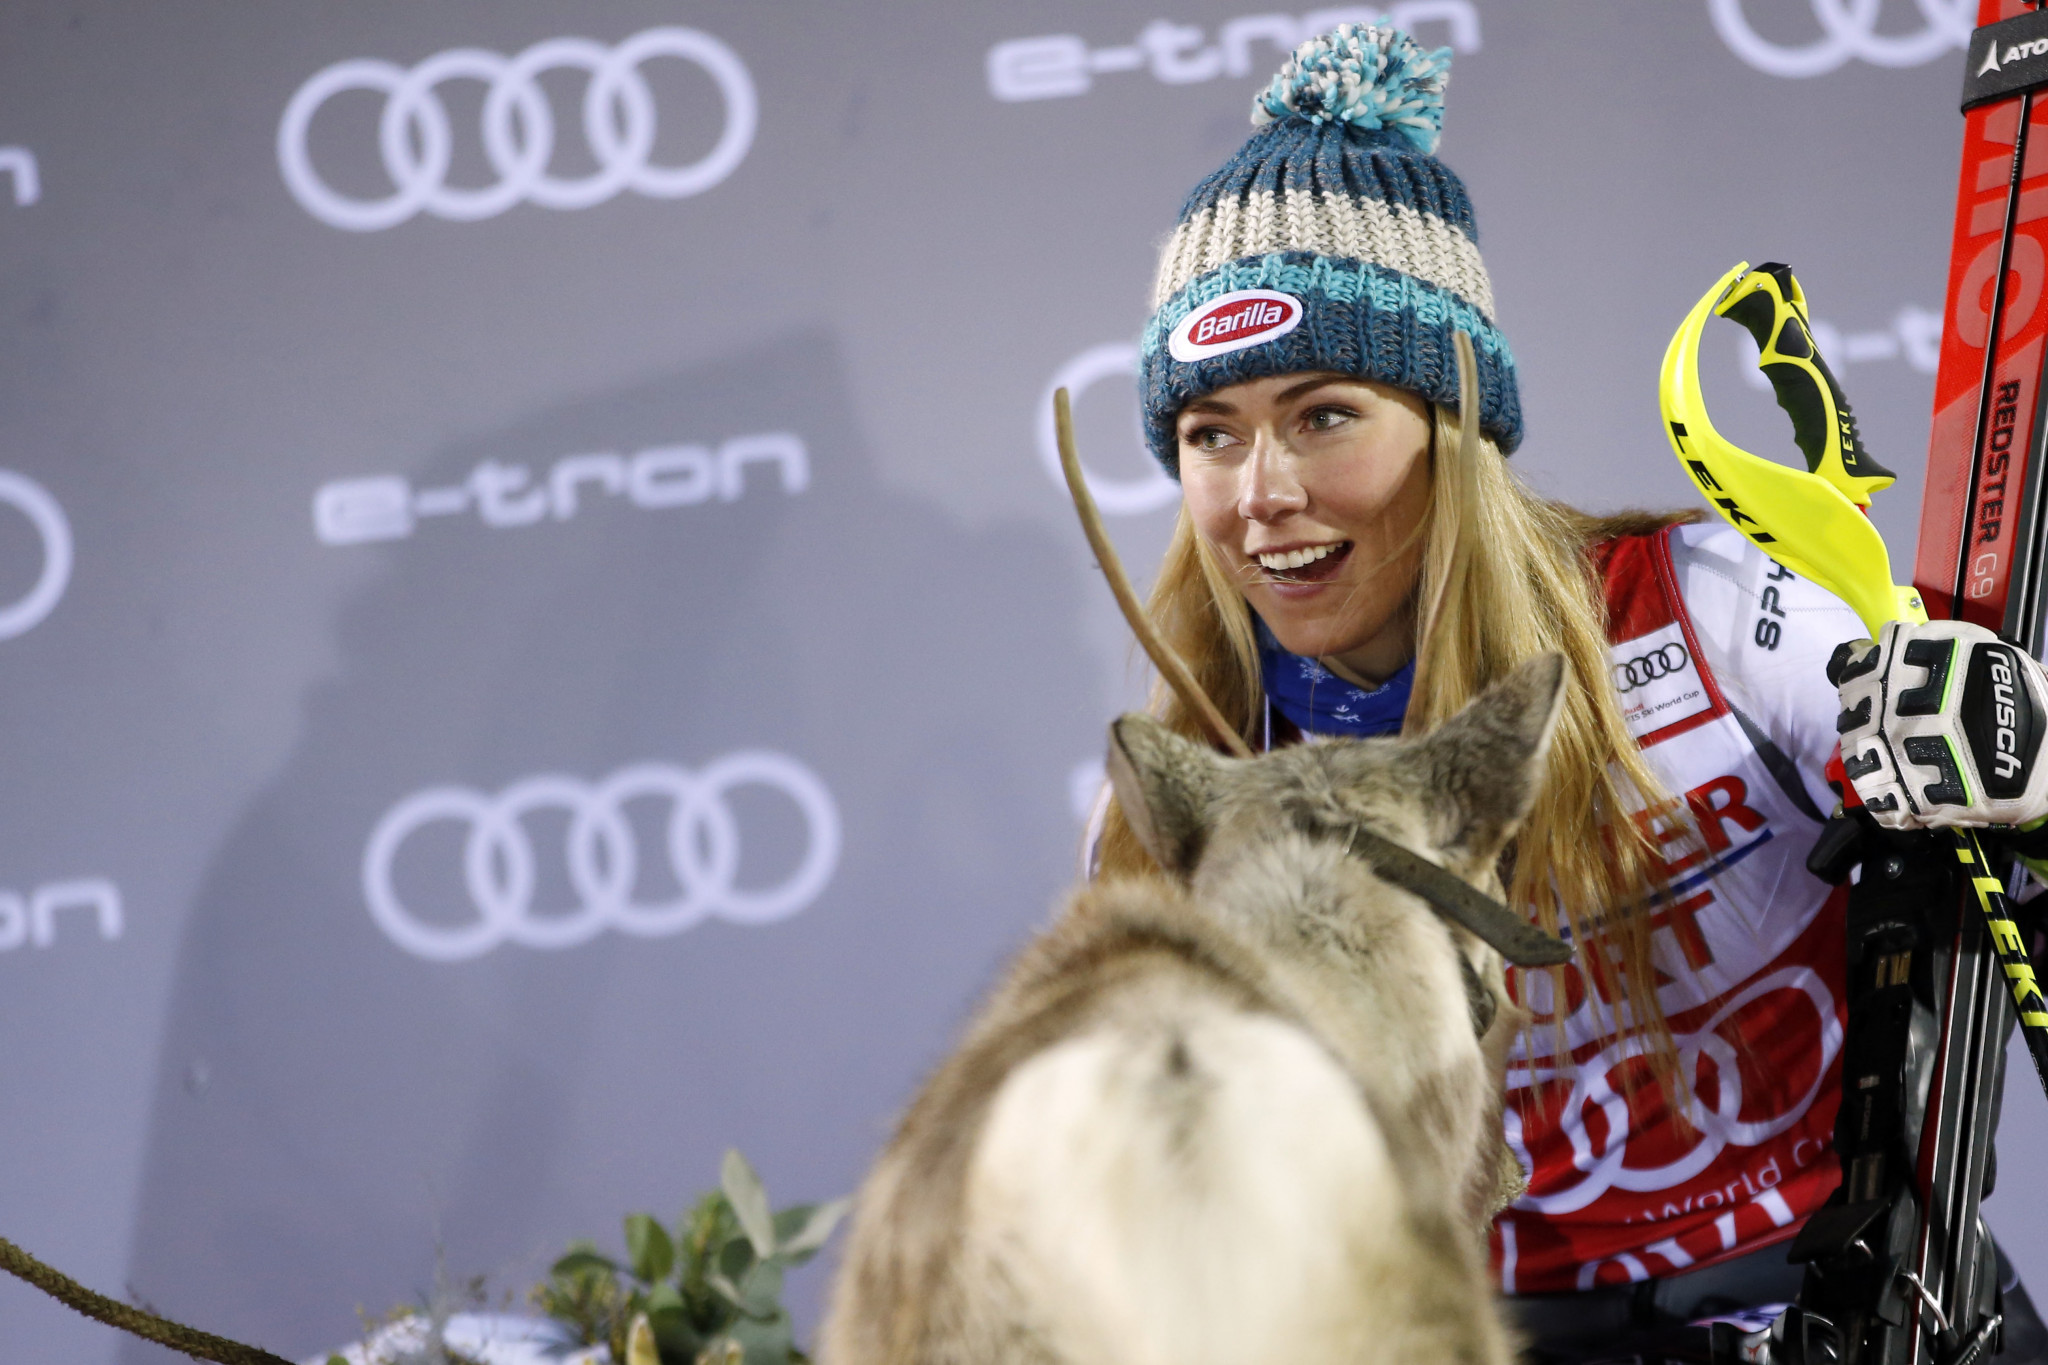 Shiffrin claims slalom World Cup win in Levi and rewarded with third reindeer